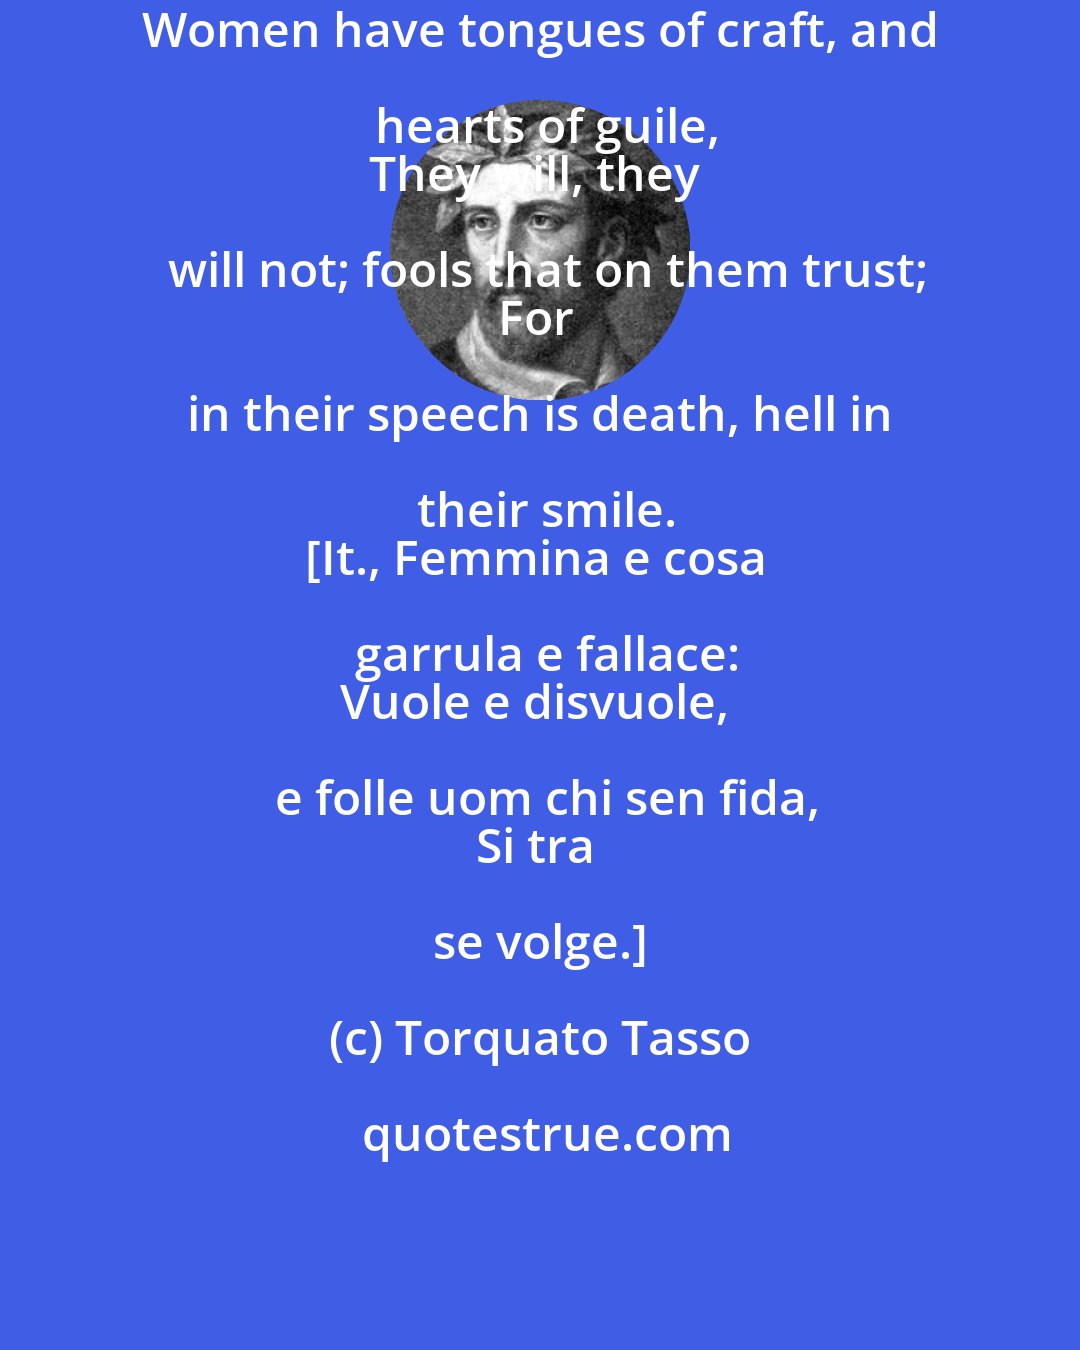 Torquato Tasso: Women have tongues of craft, and hearts of guile,
They will, they will not; fools that on them trust;
For in their speech is death, hell in their smile.
[It., Femmina e cosa garrula e fallace:
Vuole e disvuole, e folle uom chi sen fida,
Si tra se volge.]